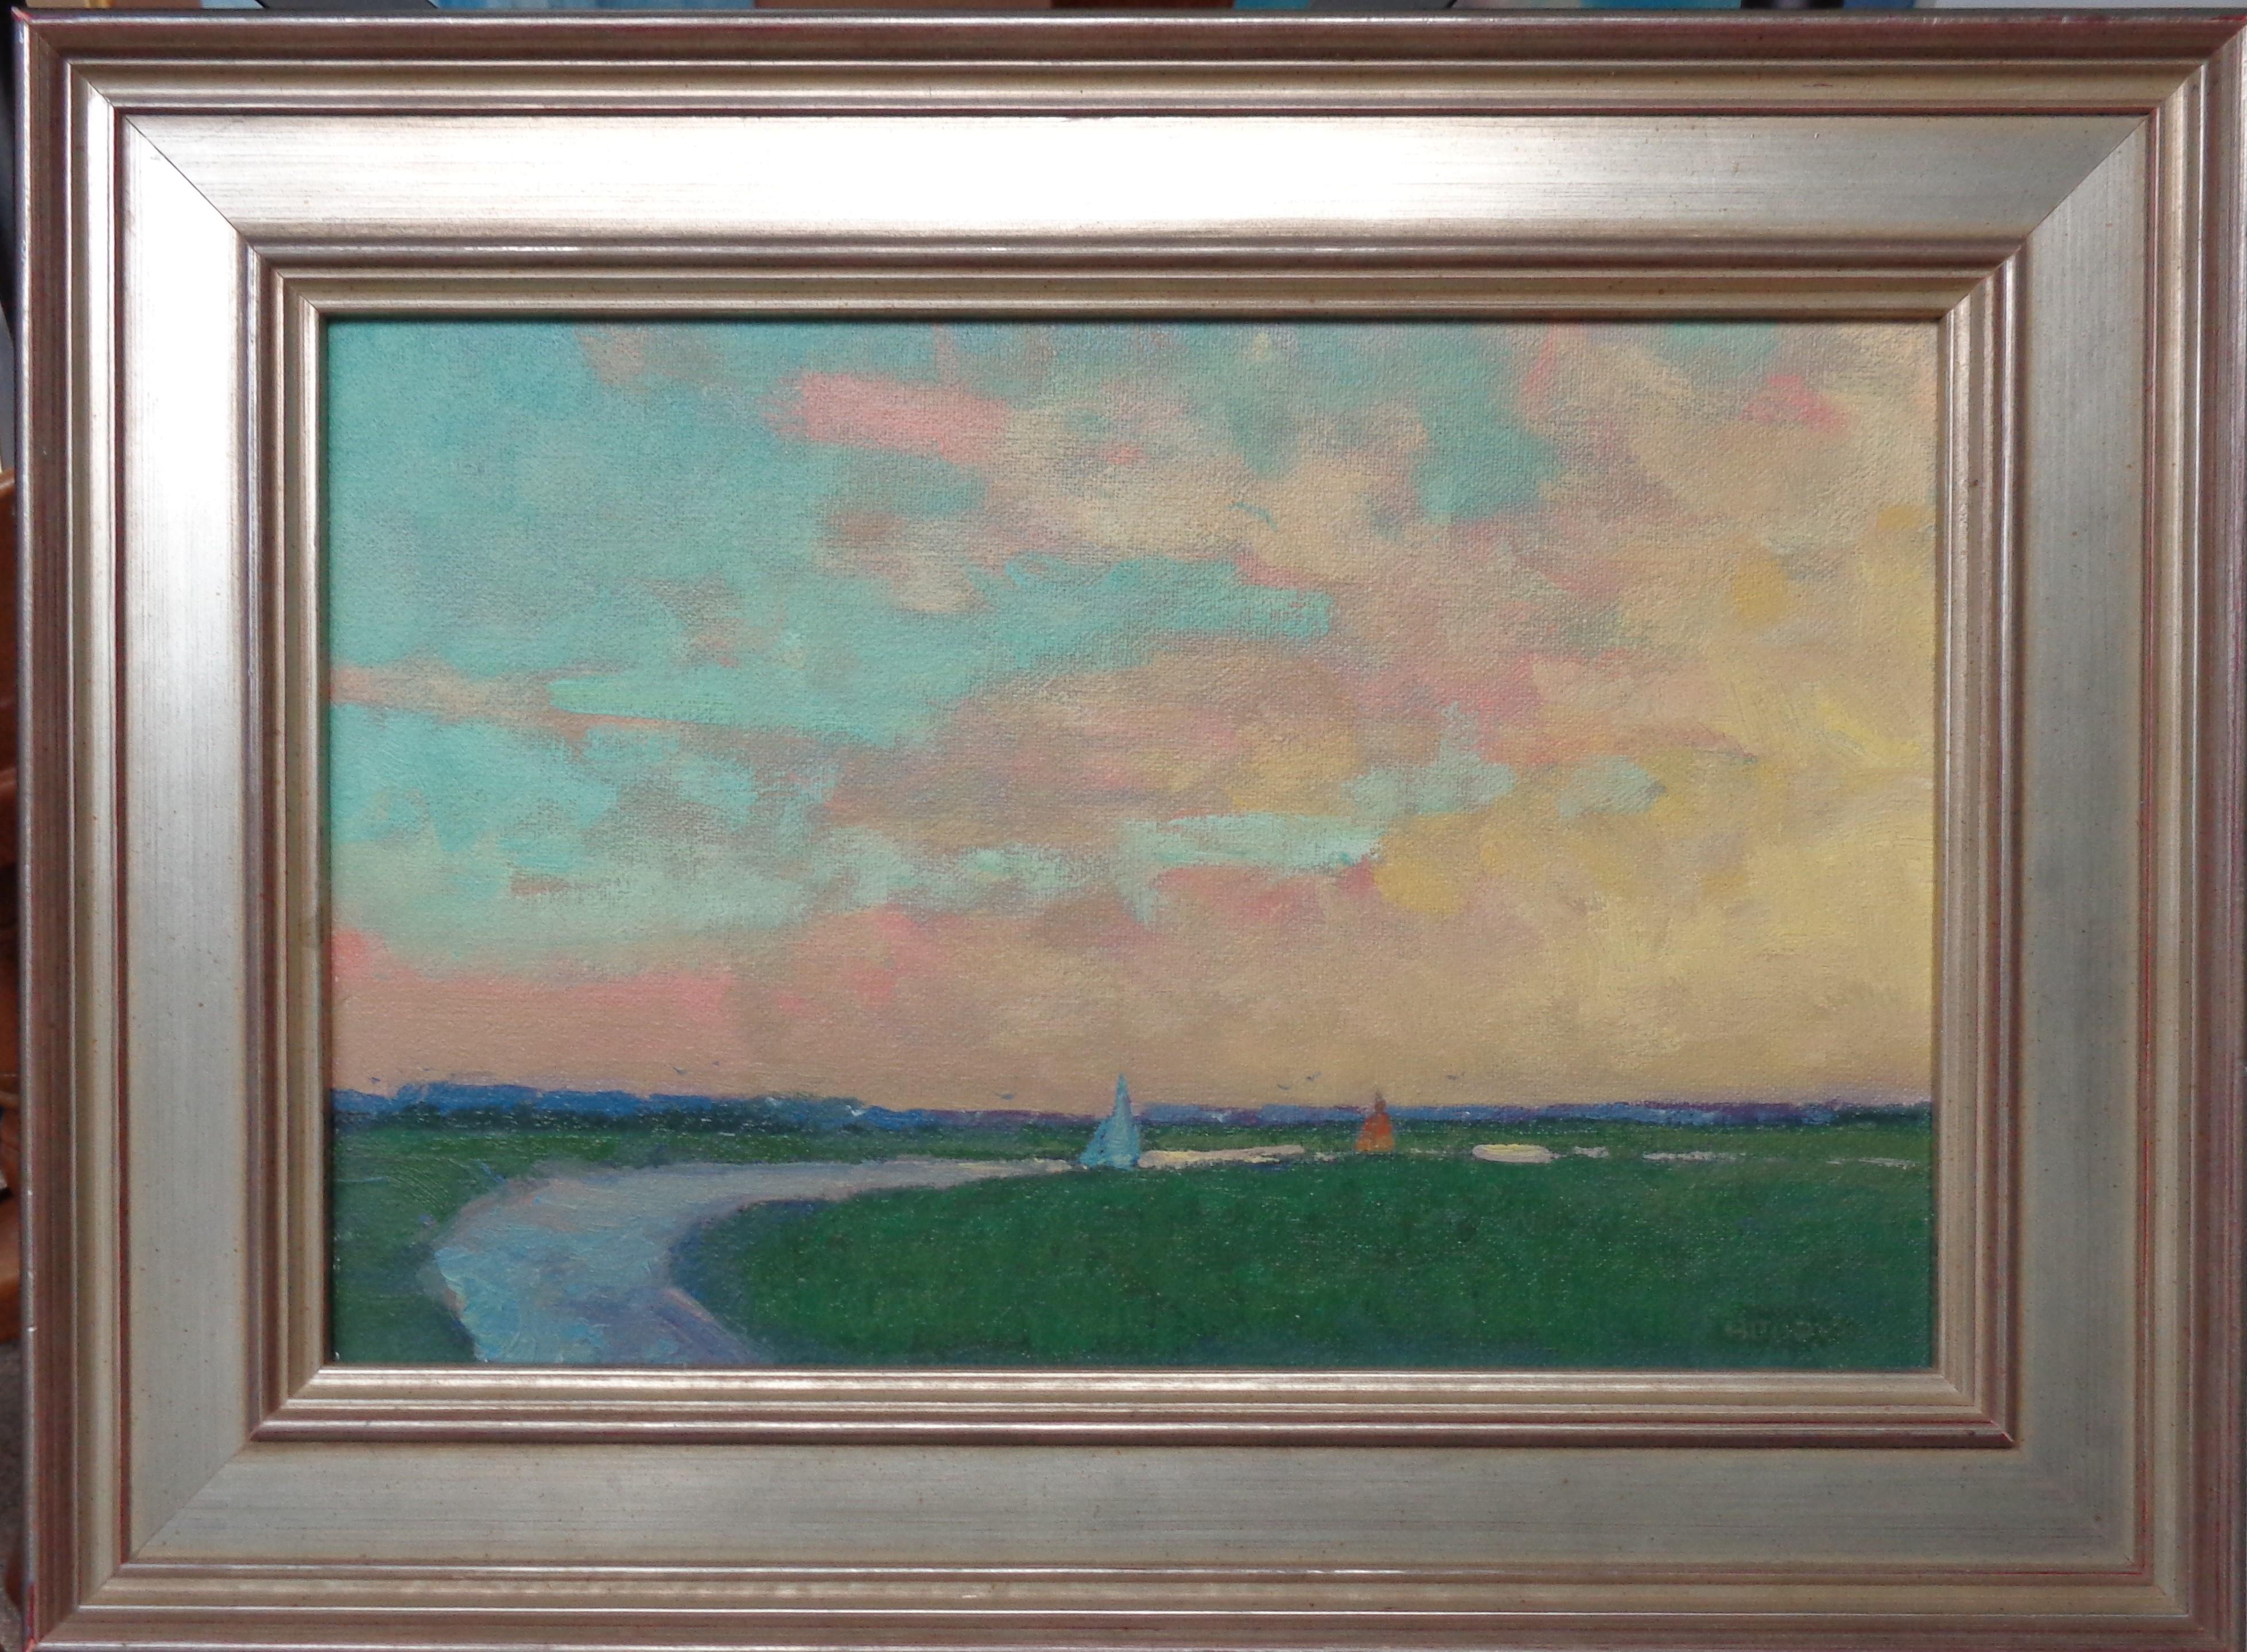 Evening Journey is a beautiful  oil painting on panel by award winning contemporary artist Michael Budden that showcases a evening sky over the marsh with some sail boats en route as well as birds.. The image measures 8 x 12 unframed. I listed this